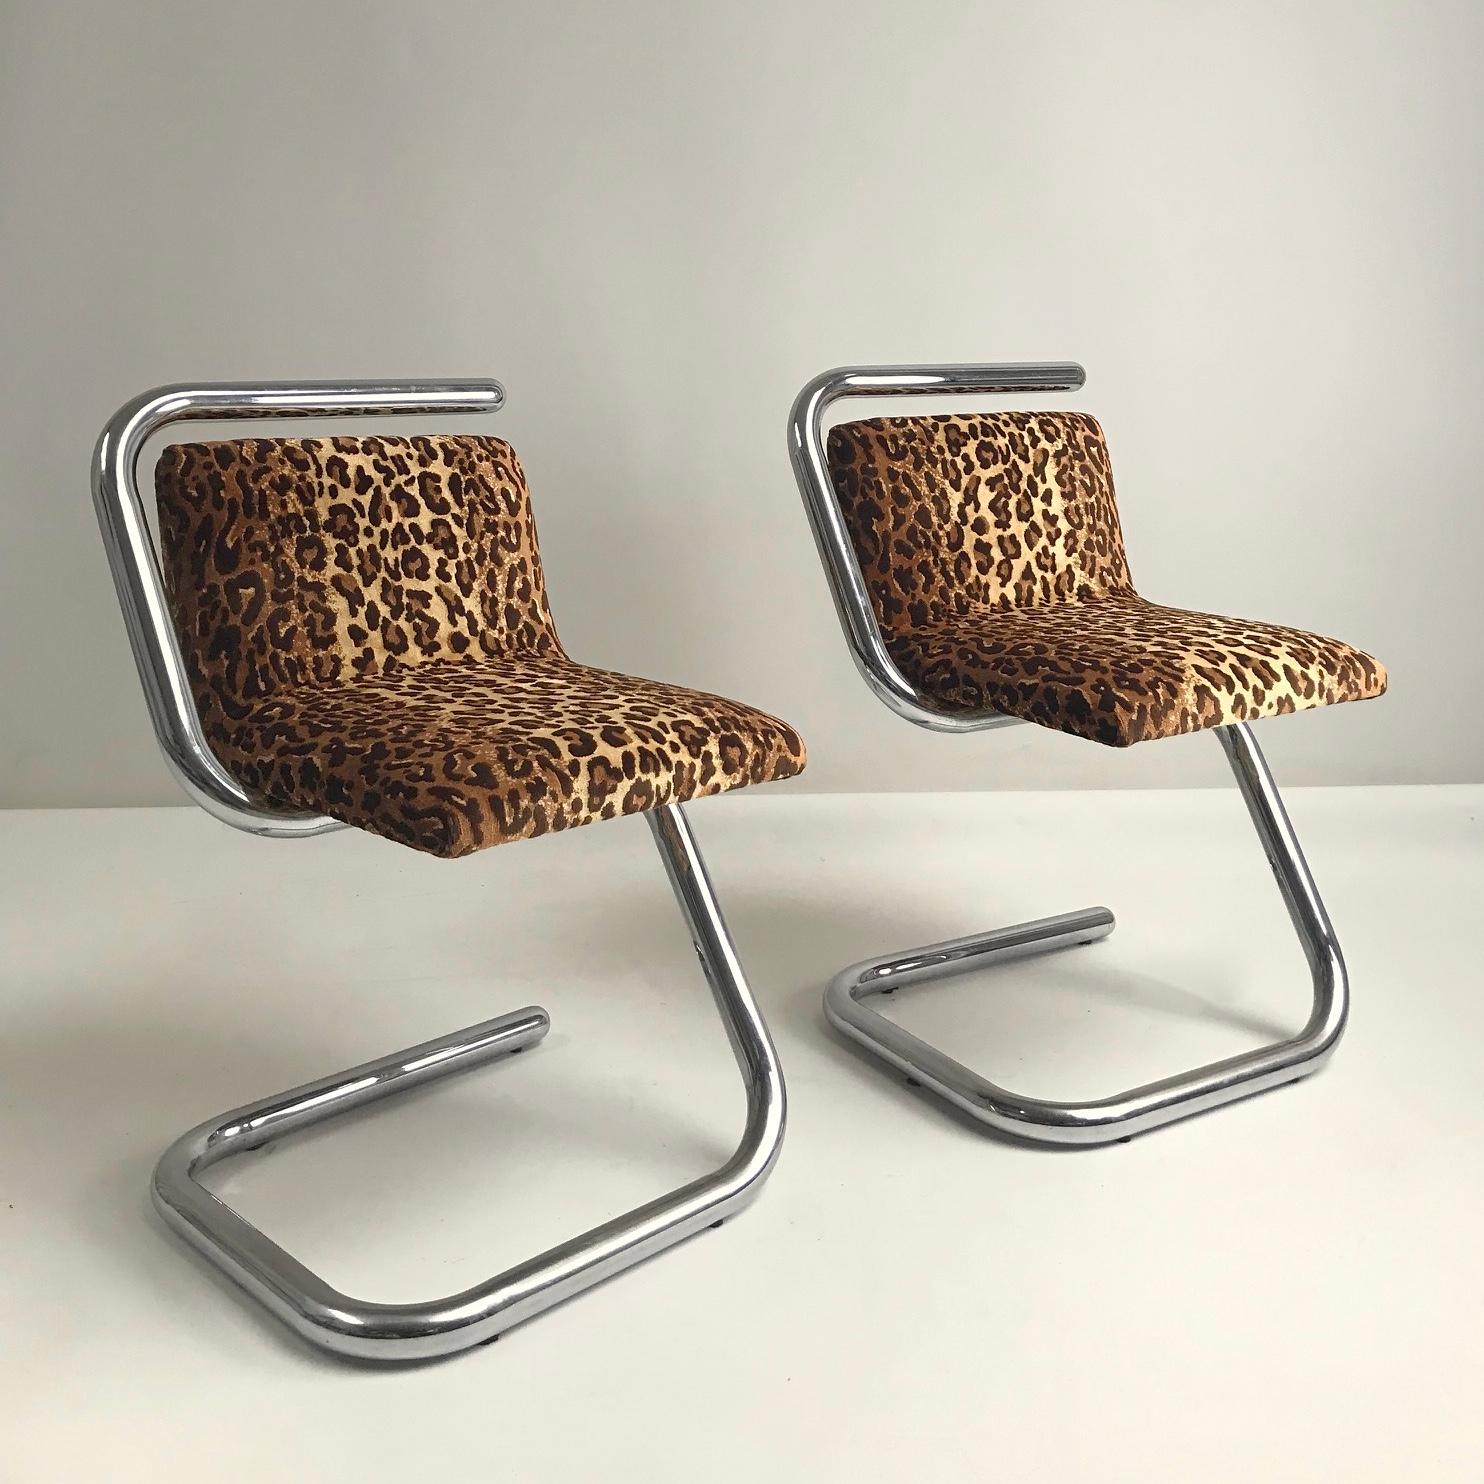 Unusual pair of mid-century chairs, circa 1970, France.
Chromed metal tubular structure, winding from the base to the back through the seating. 
The seat and back covered with leopard pattern fabric.
Dimensions: 74 cm H, 46 cm W, 48 cm D, seat